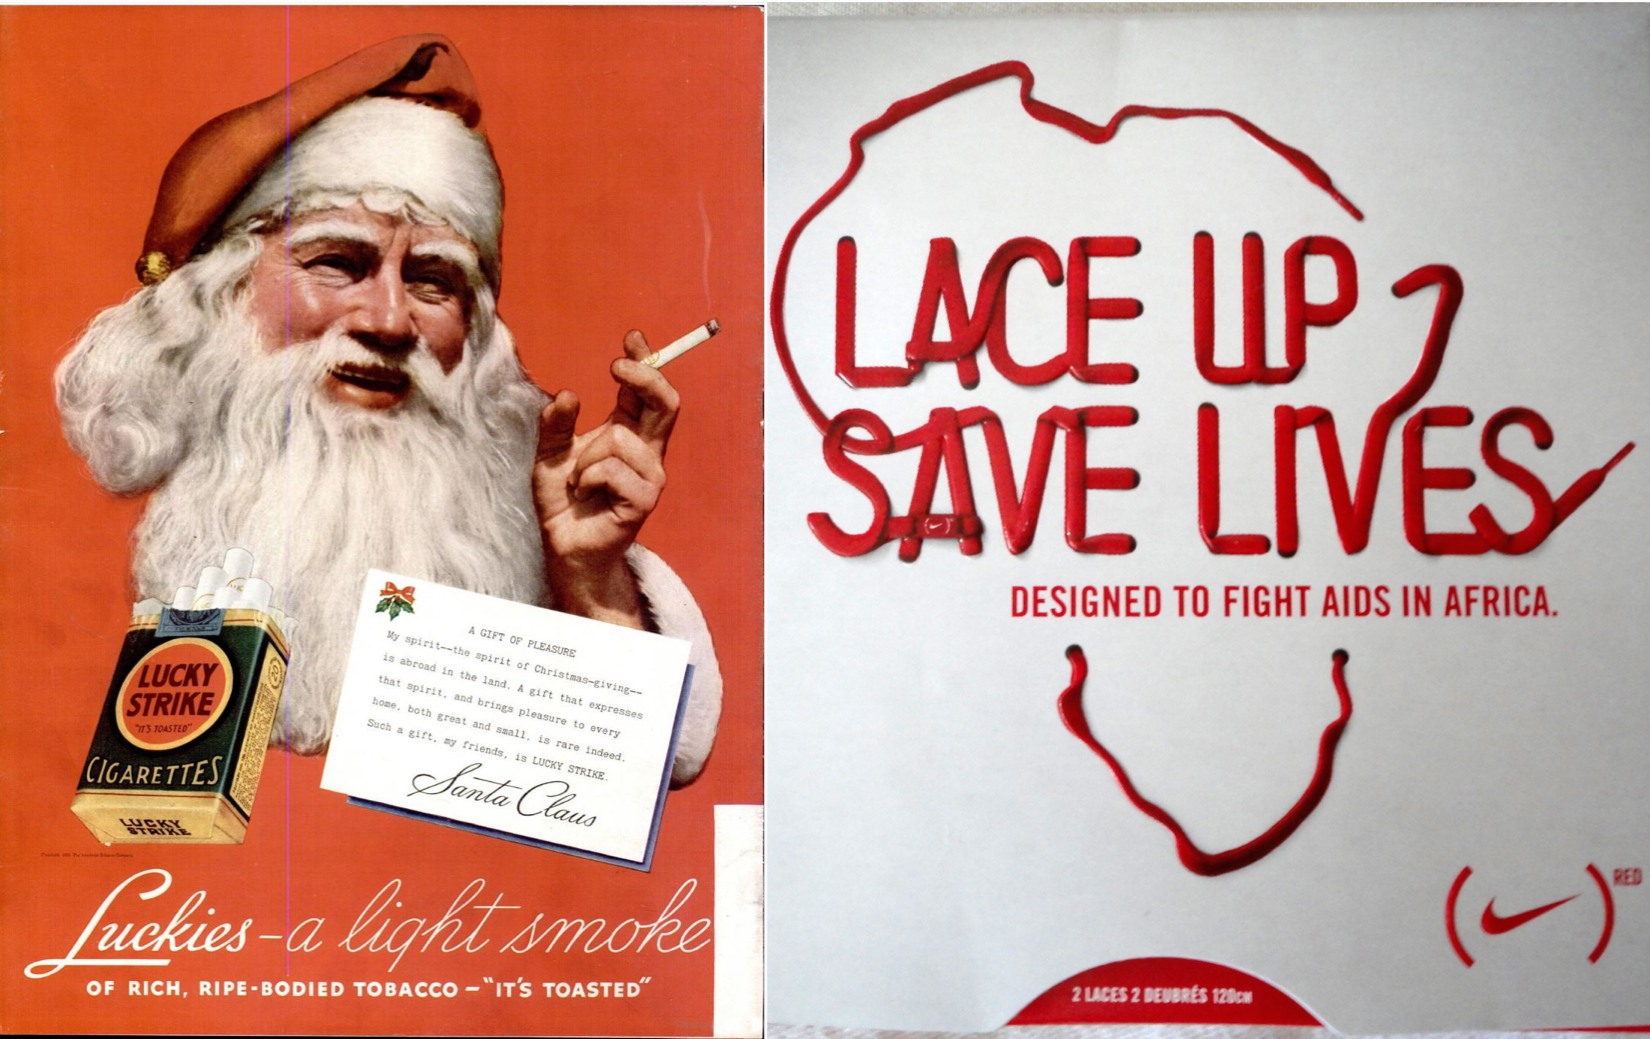 Left: A smiling Santa Claus smokes a cigarette. A card in front of him reads, A Gift of Pleasure: My spirit, the Spirit of Christmas-giving, is abroad in the land. A gift that expresses that spirit, and brings pleasure to every home, both great and small, is rare indeed. Such a gift, my friends, is LUCKY STRIKE. Santa Claus. Below Santa are the words Luckies, a light smoke of rich, ripe-bodied tobacco. It's toasted. Right: Some bright red shoelaces are laced through a white background to form a loose silhouette of Africa and the words Lace up Save lives. A caption reads Designed to fight AIDS in Africa. The Nike logo with the superscript RED is in the bottom corner.